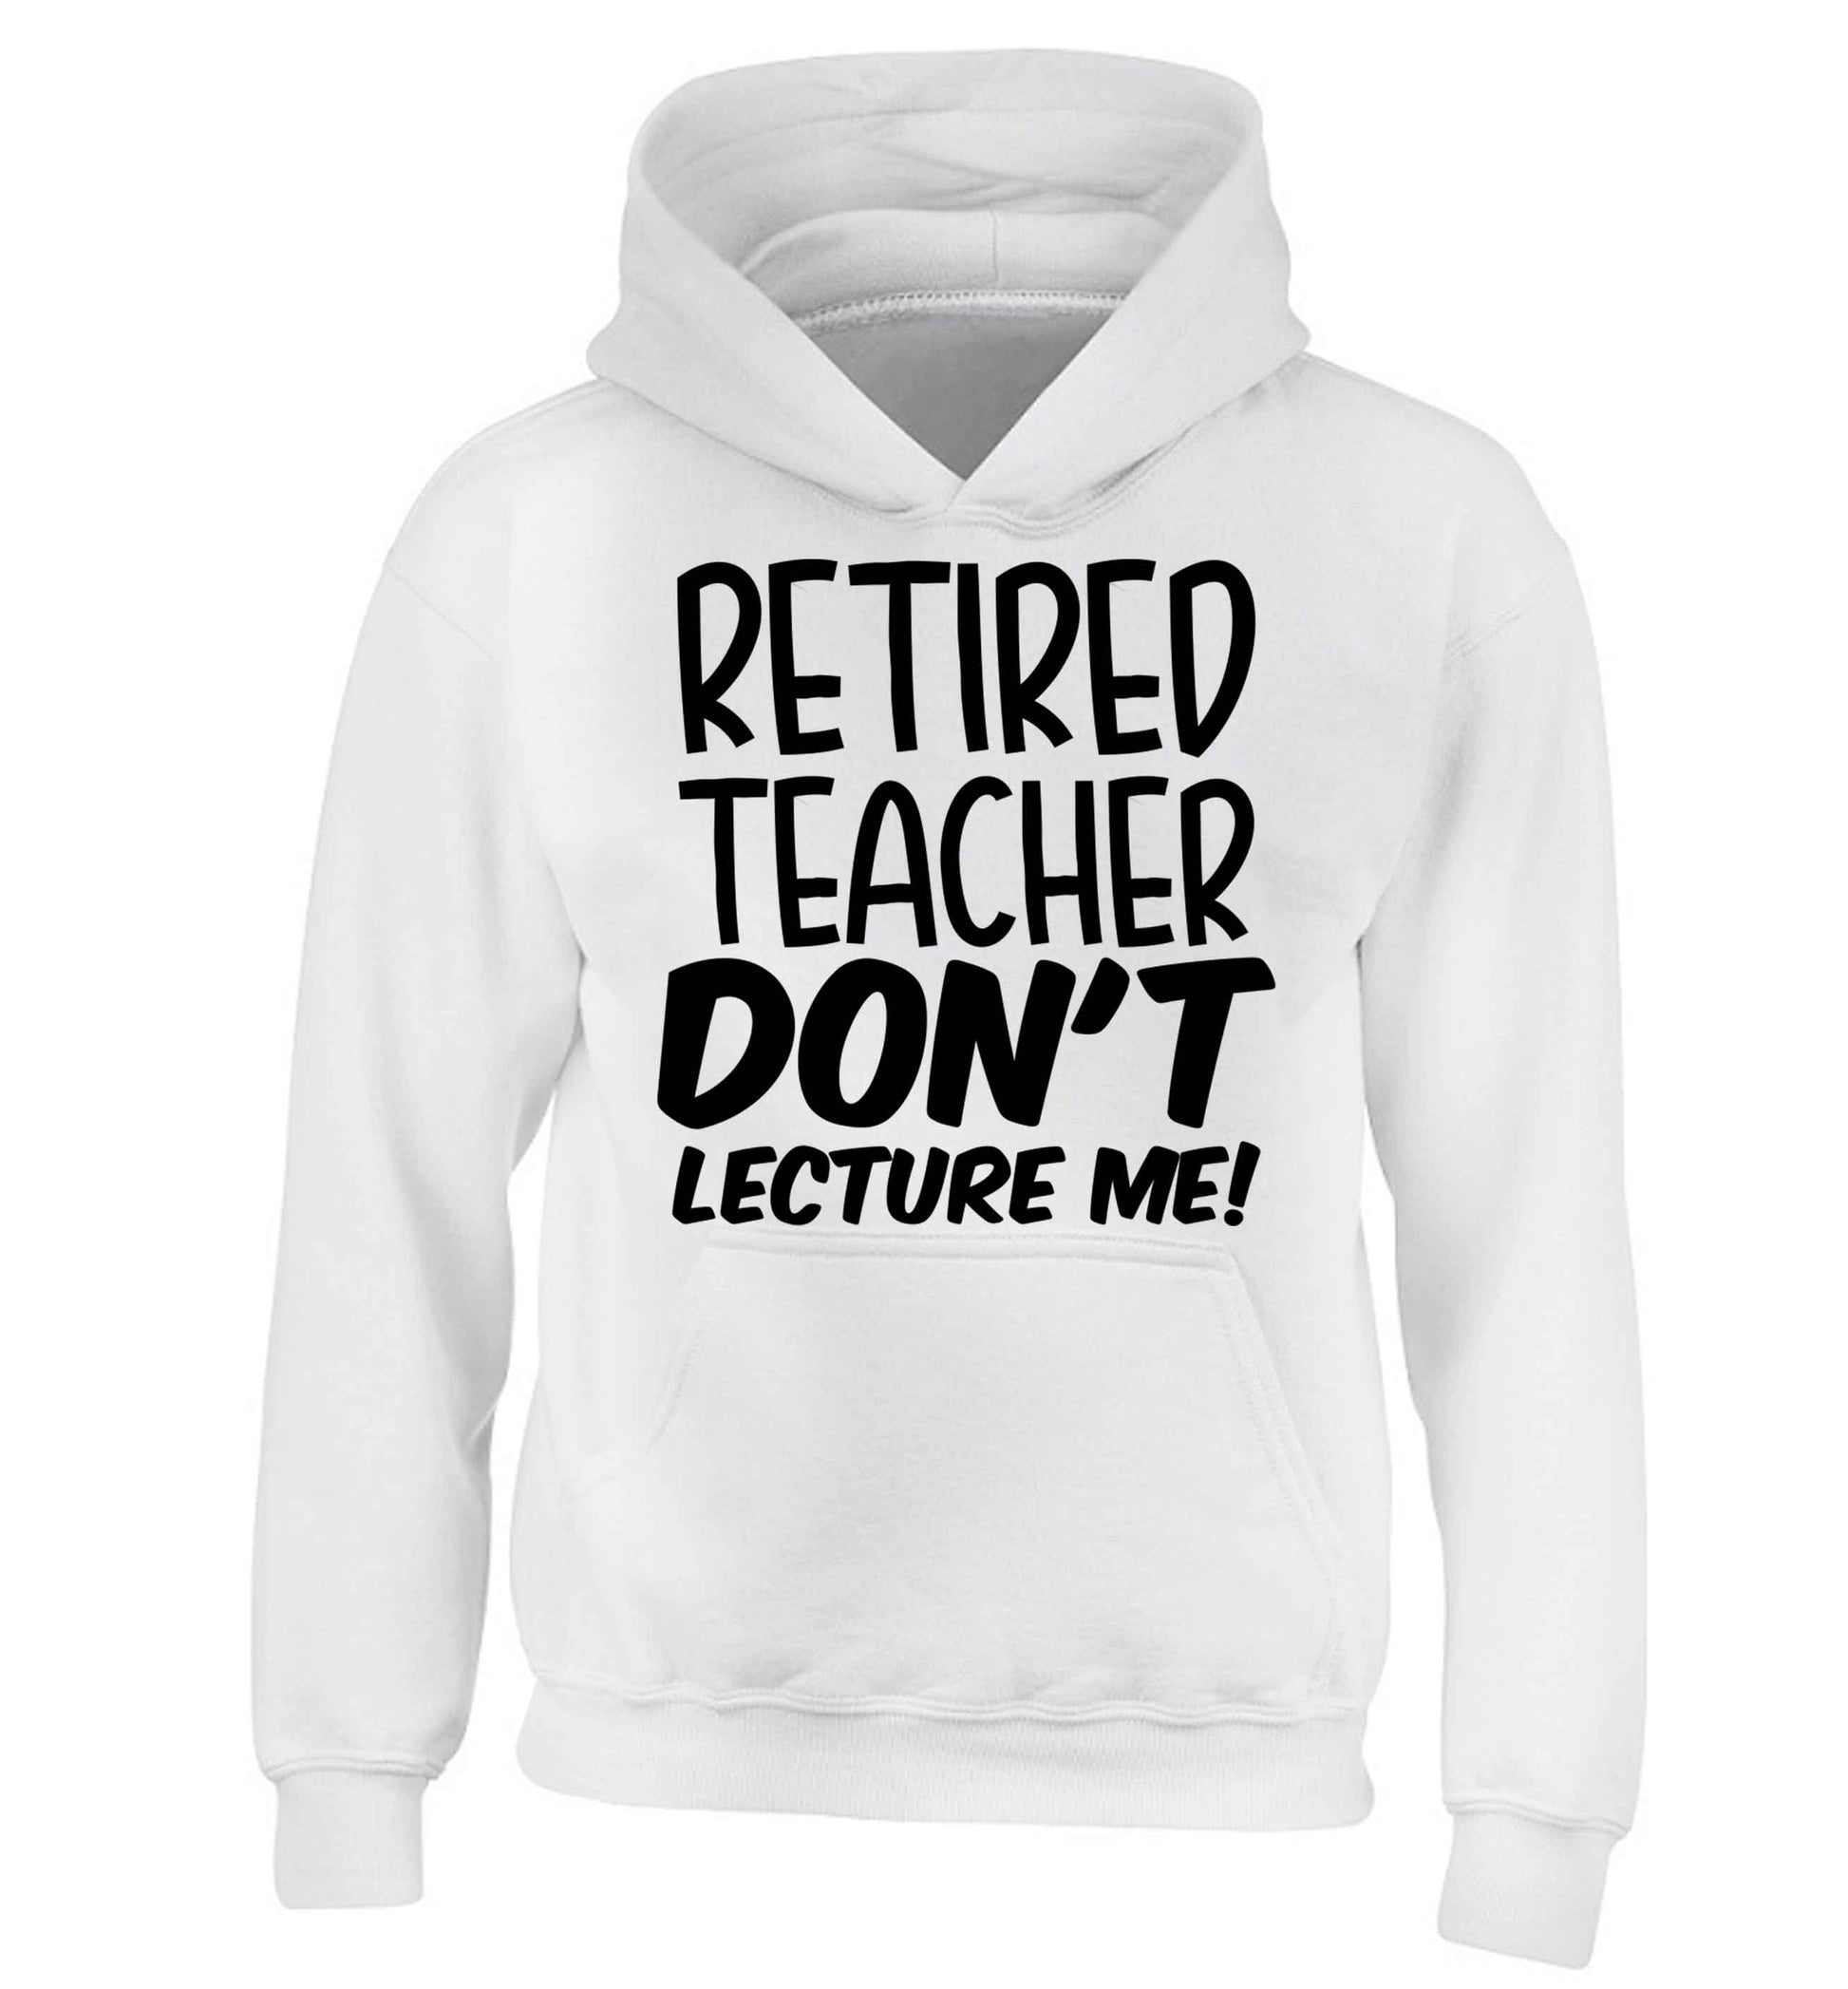 Retired teacher don't lecture me! children's white hoodie 12-13 Years